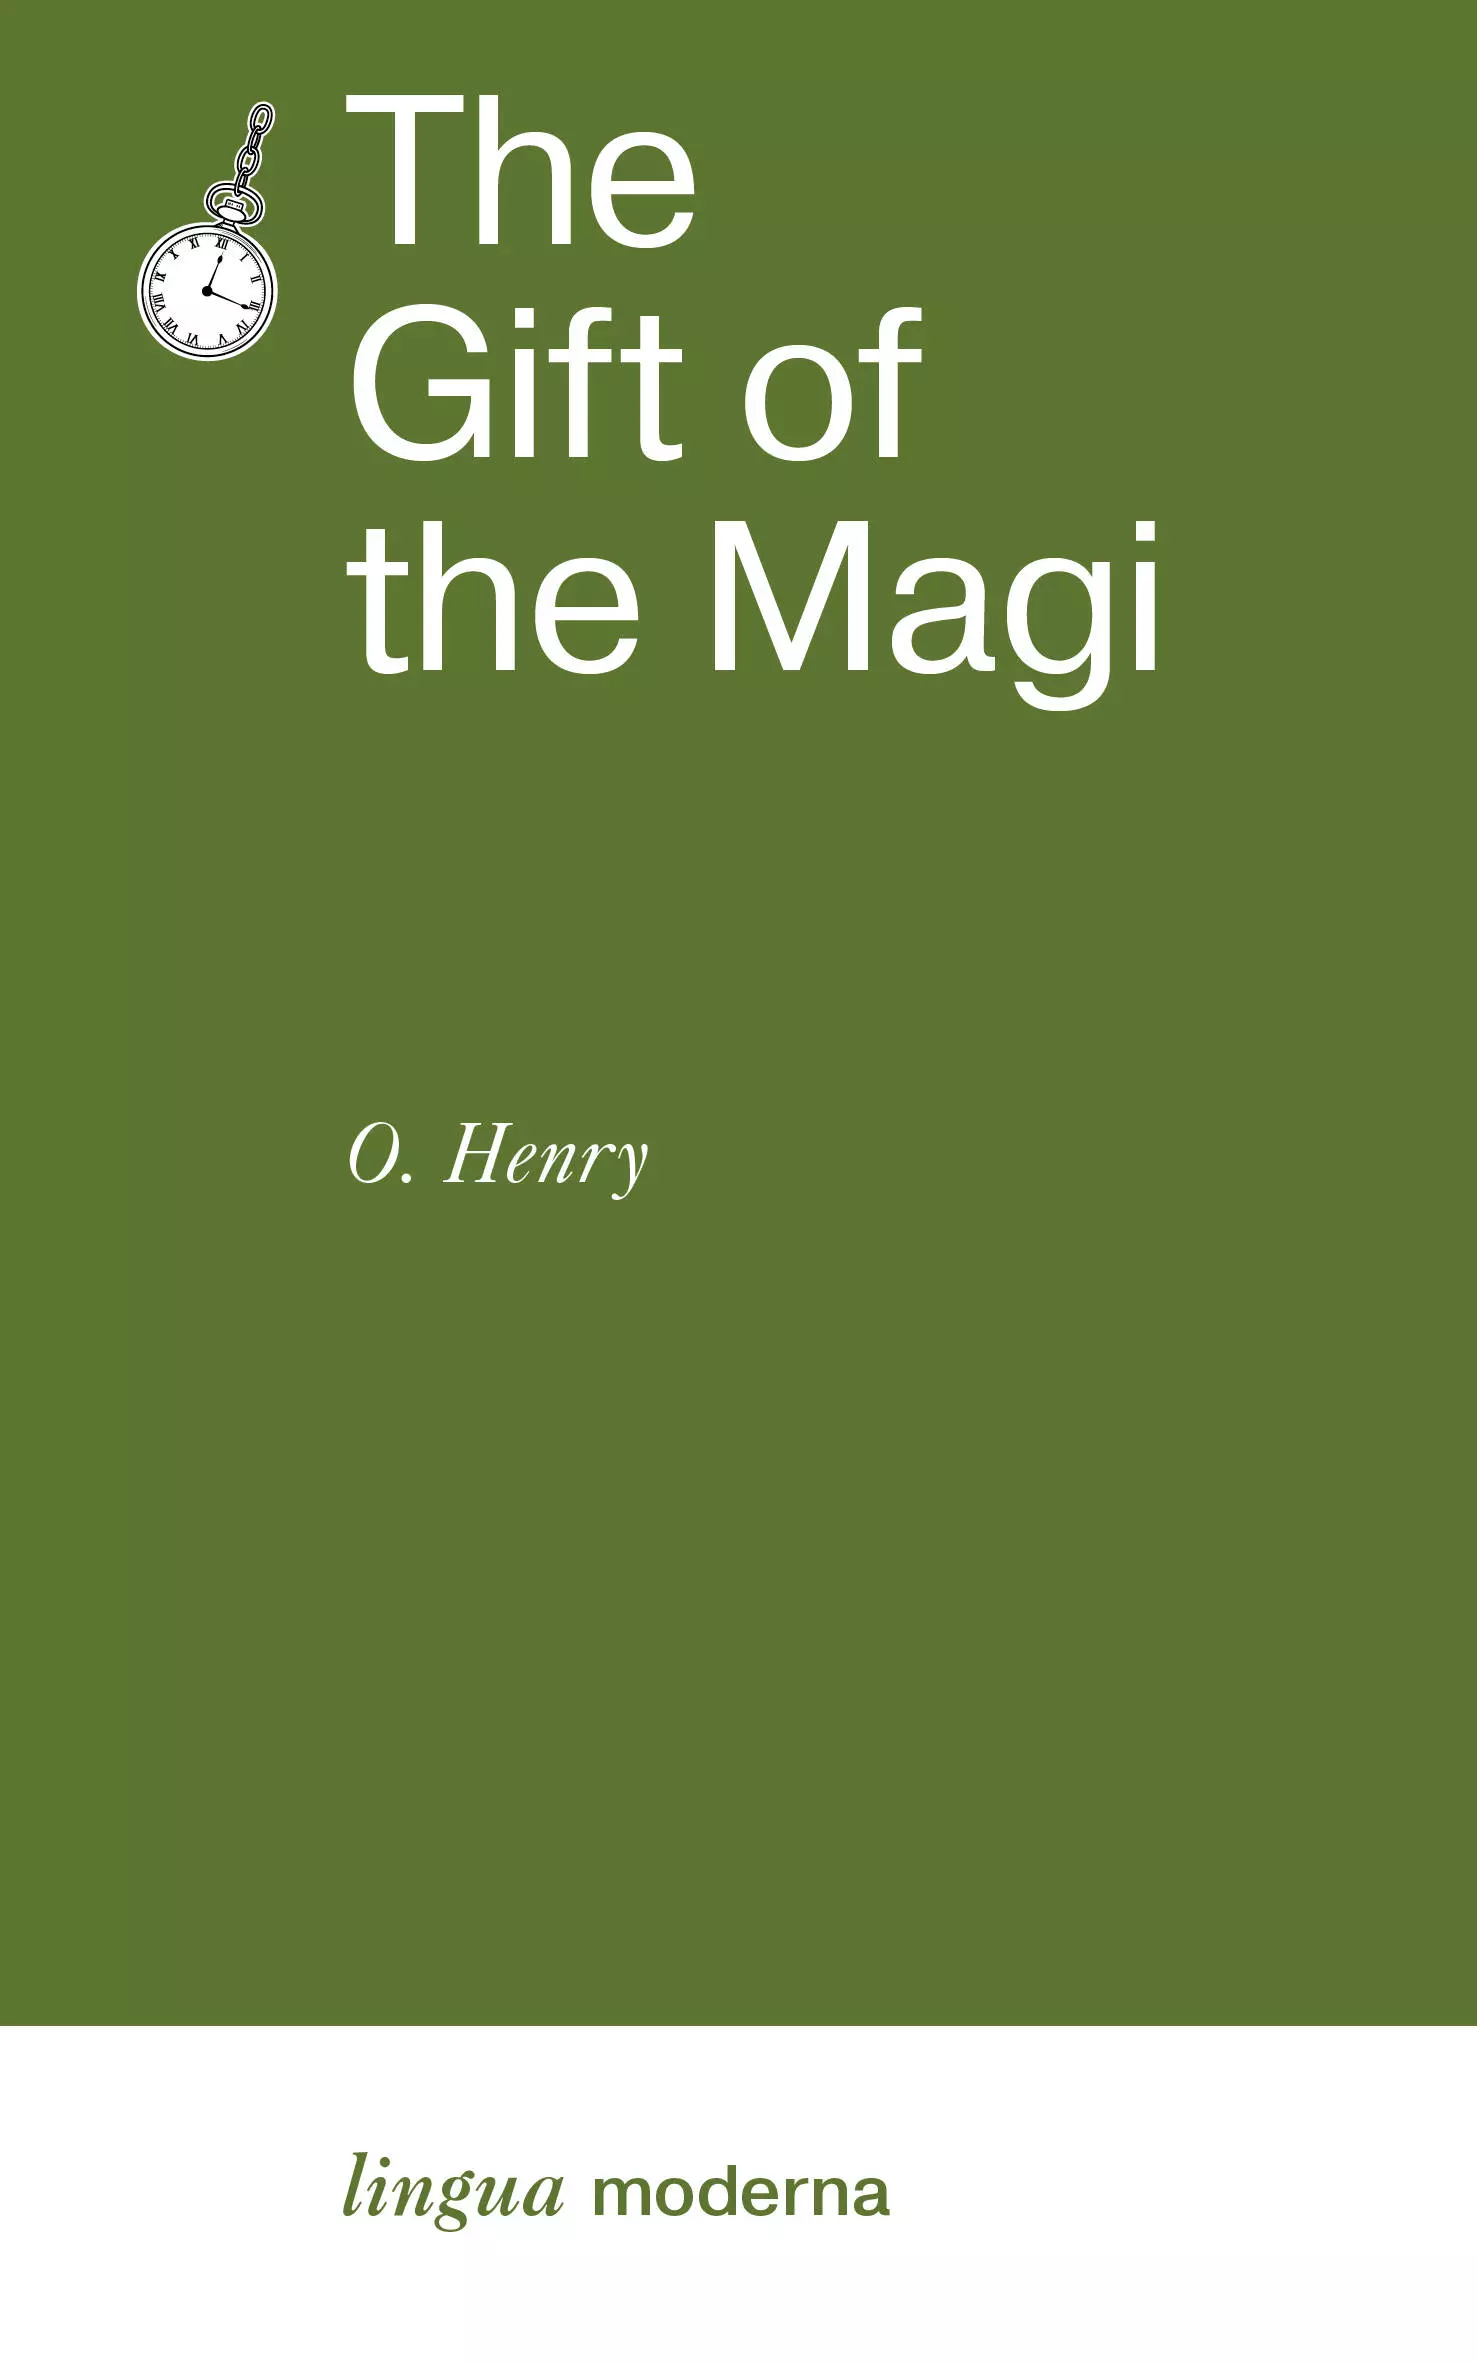 Генри О. The Gift of the Magi генри о дары волхвов и другие рассказы the gift of the magi and other stories mp3